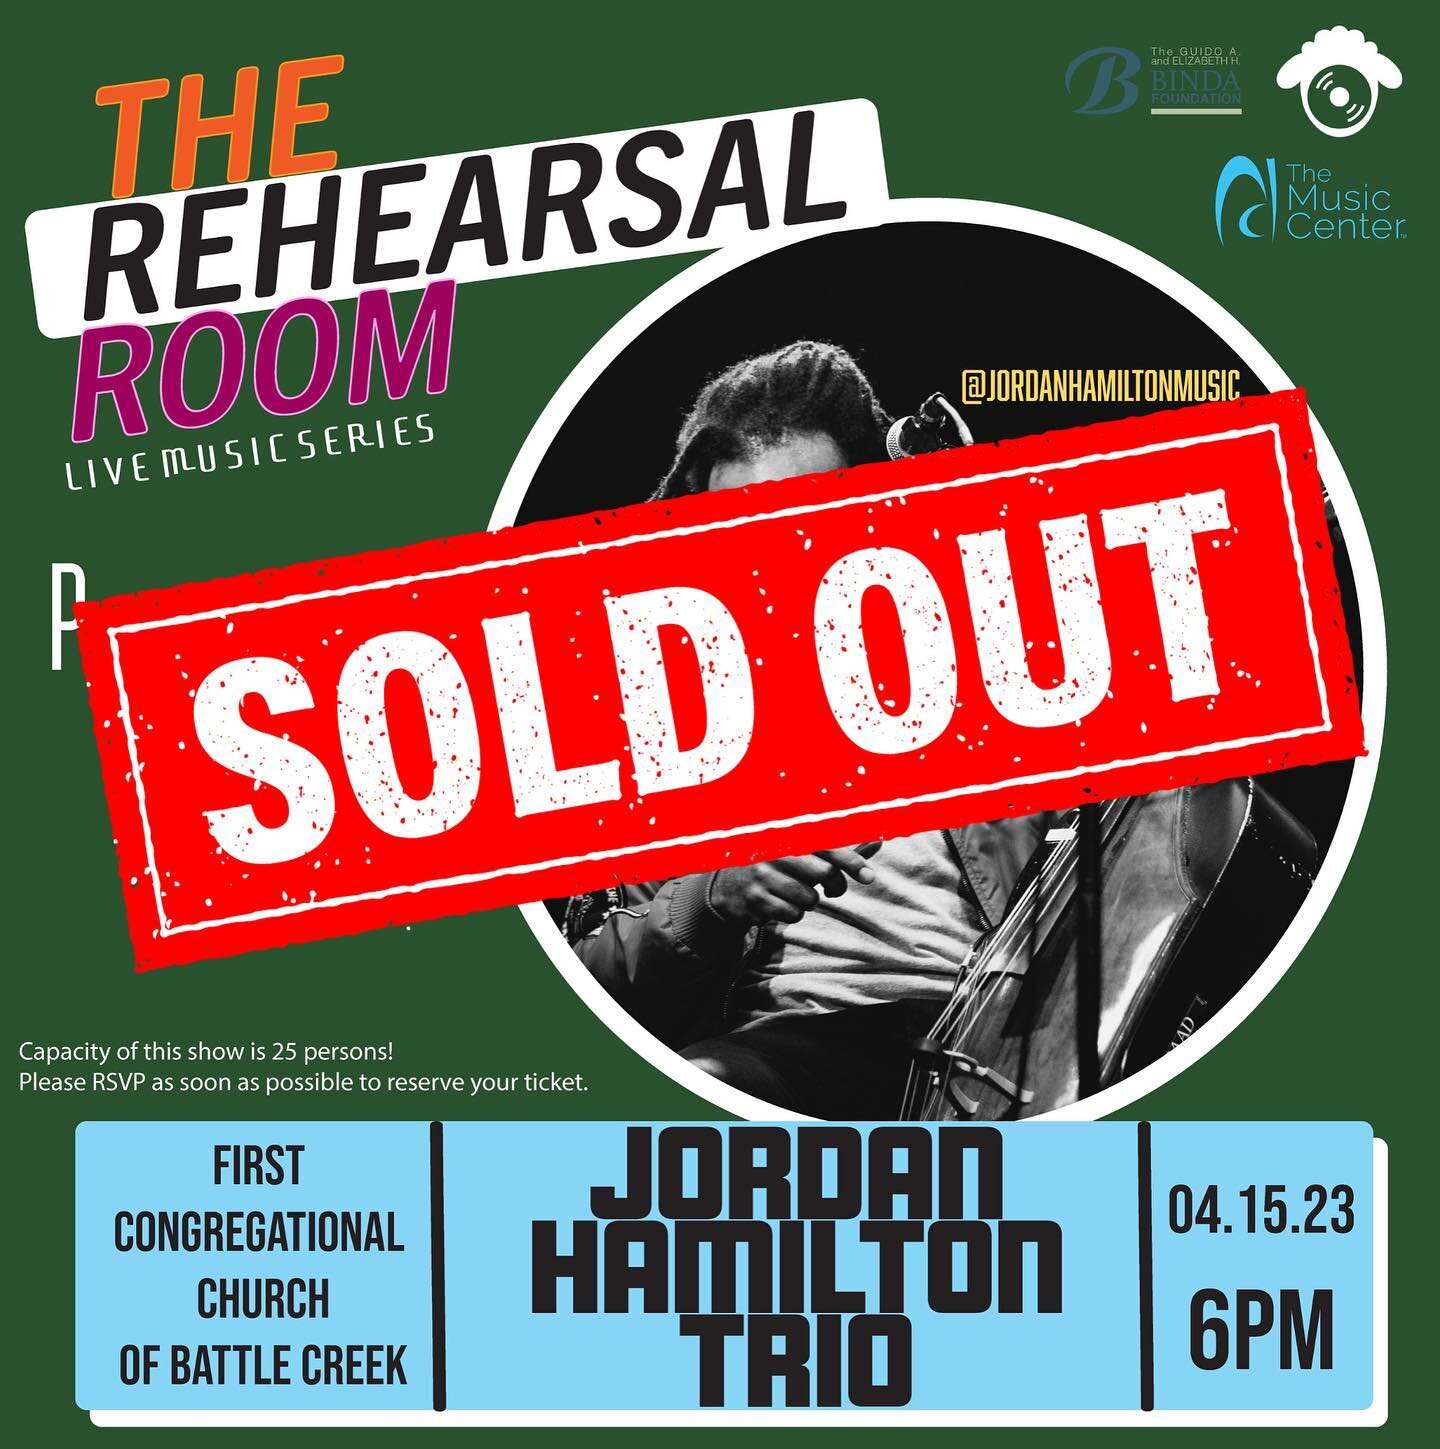 Another sold out show!! 🚨SEATED TICKETS ARE SOLD OUT!! We will be taking payments at the door, standing room ONLY!! See you all on the 15th!

@jordanhamiltonmusic x Blvcksheep

#therehearsalroom